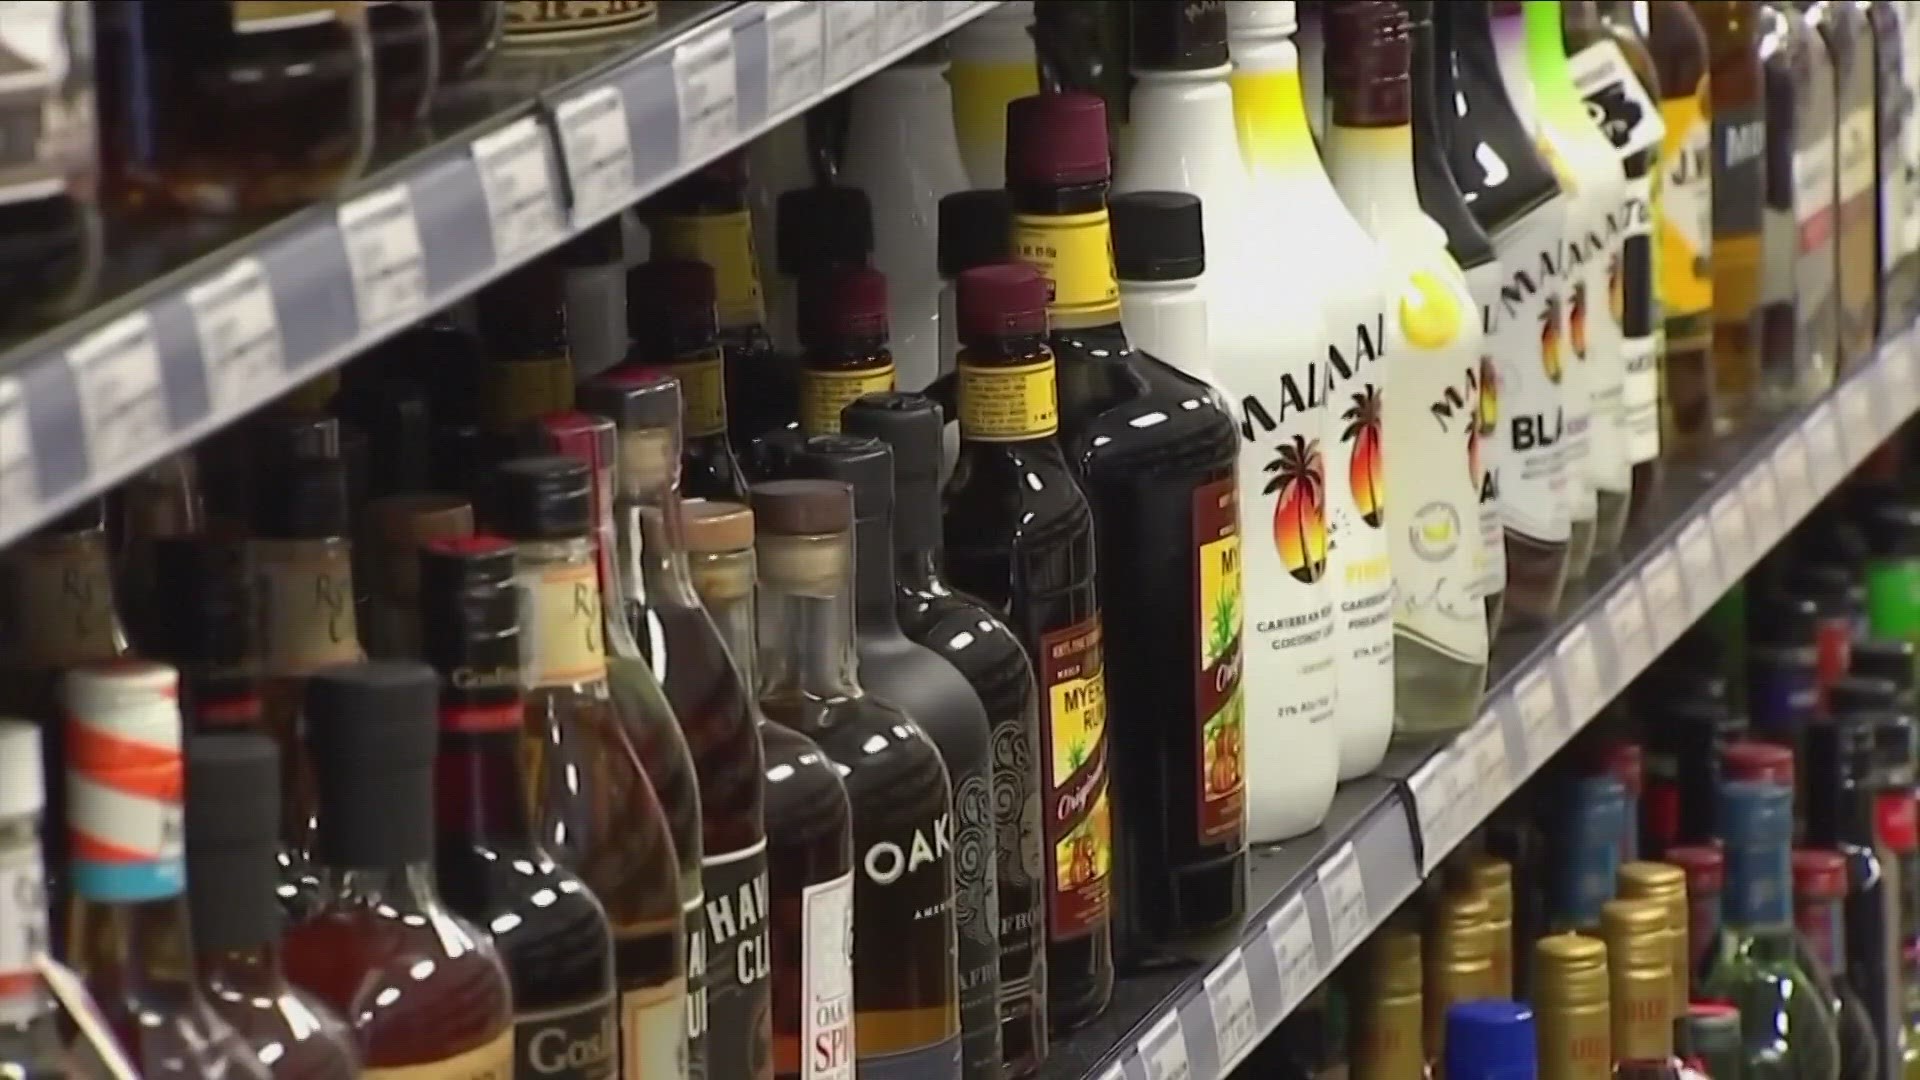 A state commission recommended 18 changes to the state’s laws, including hours of operation for liquor stores.